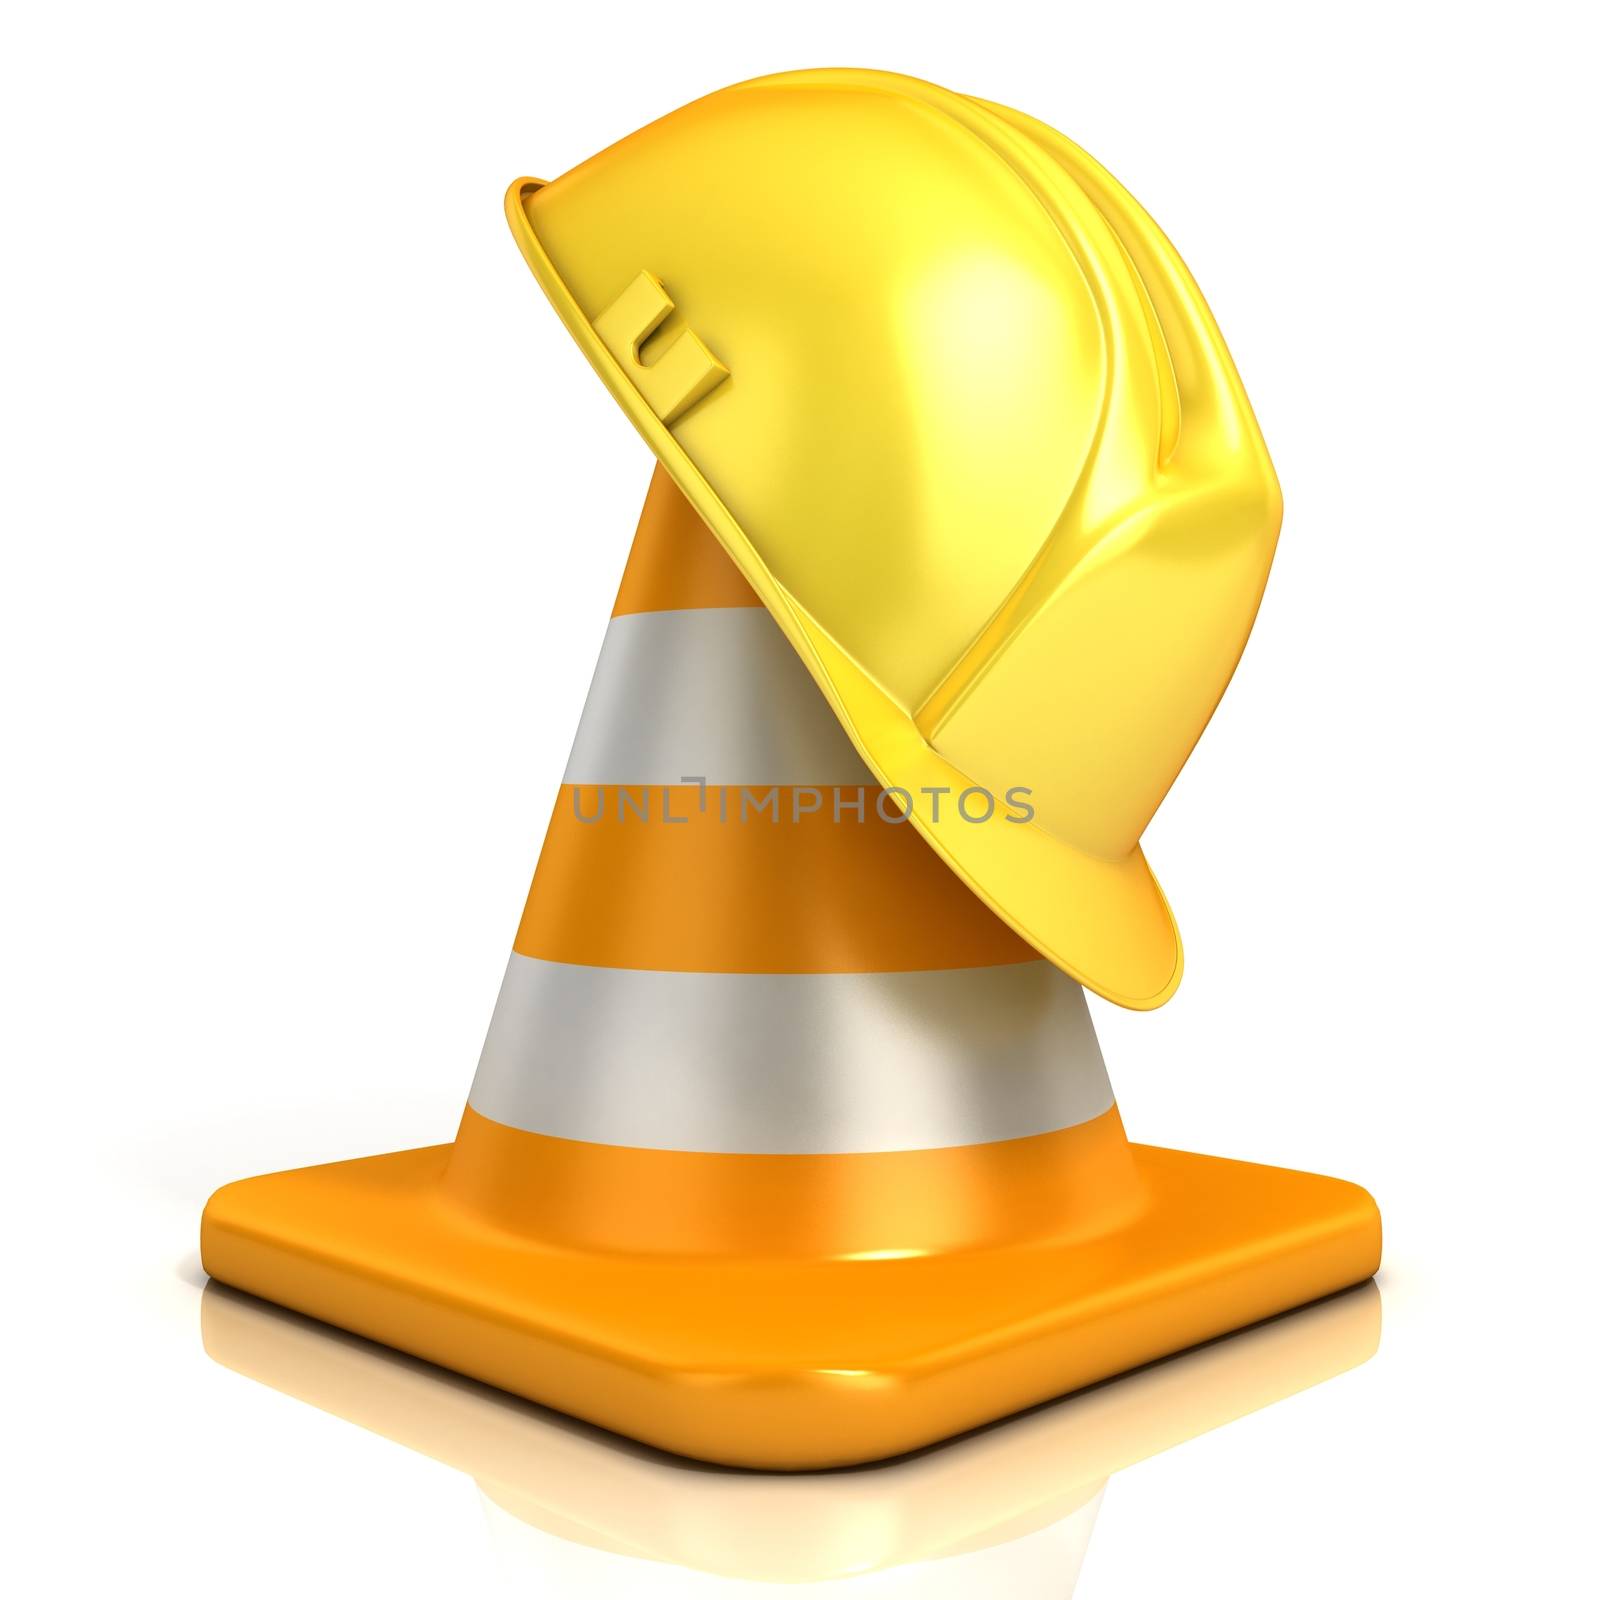 Traffic cone and safety helmet by djmilic